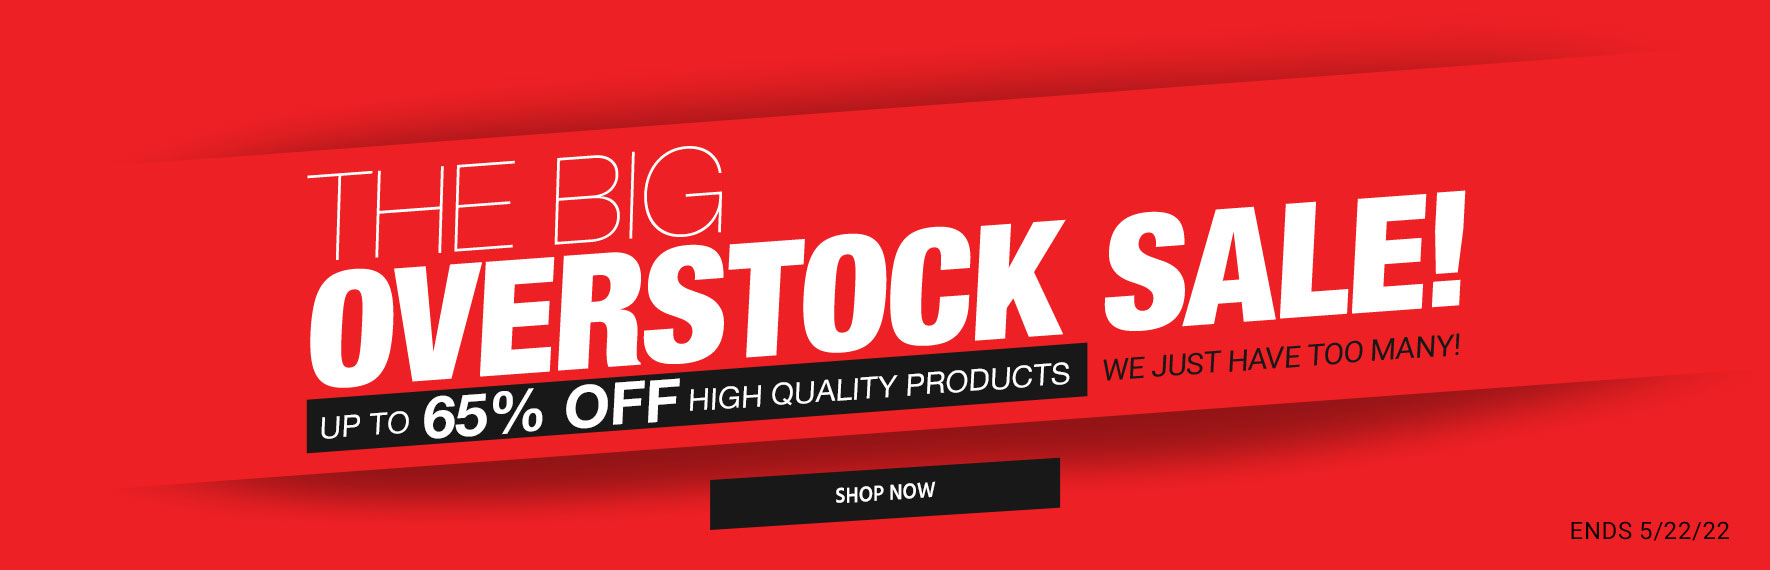 The Big Overstock Sale! Up to 65% off high quality products We just have too many! Ends 5/22/22 Shop Now